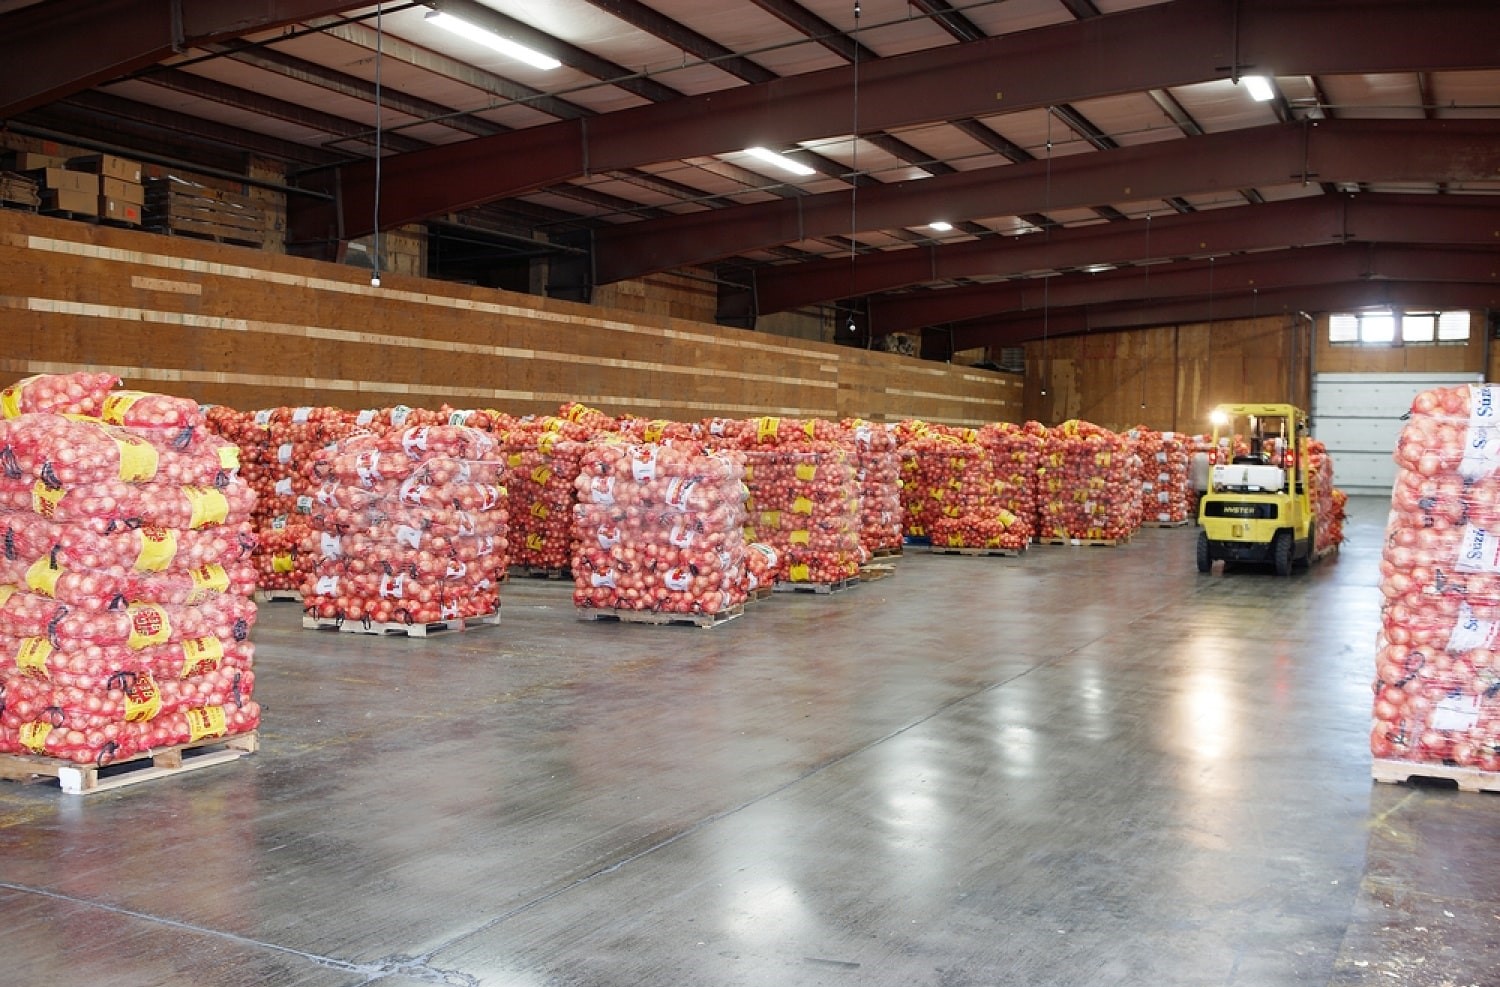 How to Find a Produce Wholesale Company?